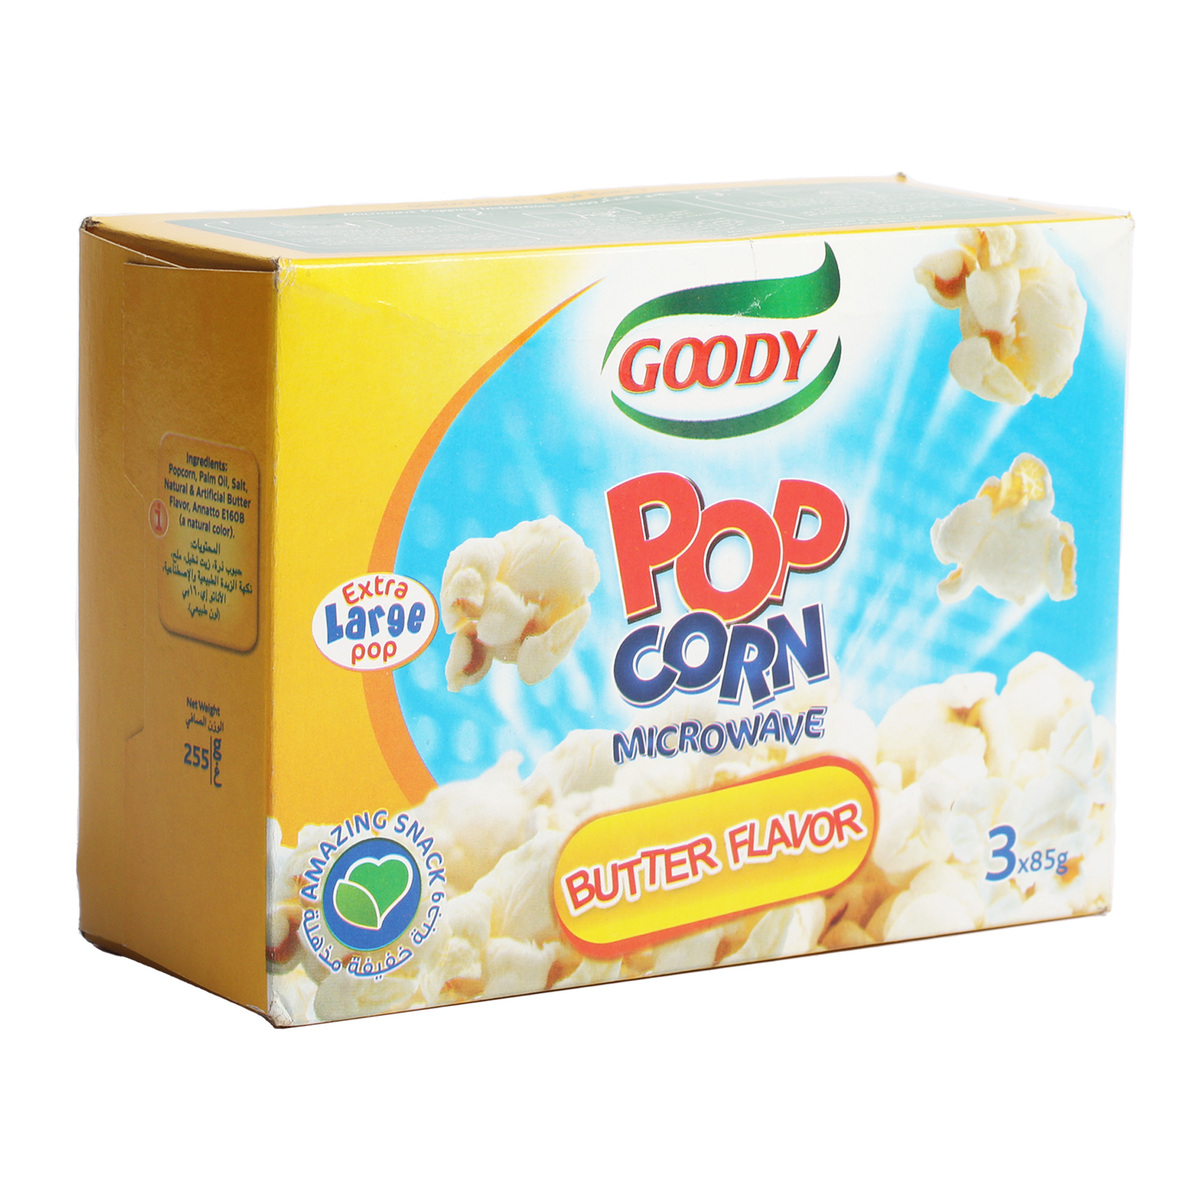 Goody Butter Flavoured Microwave Popcorn 255 g